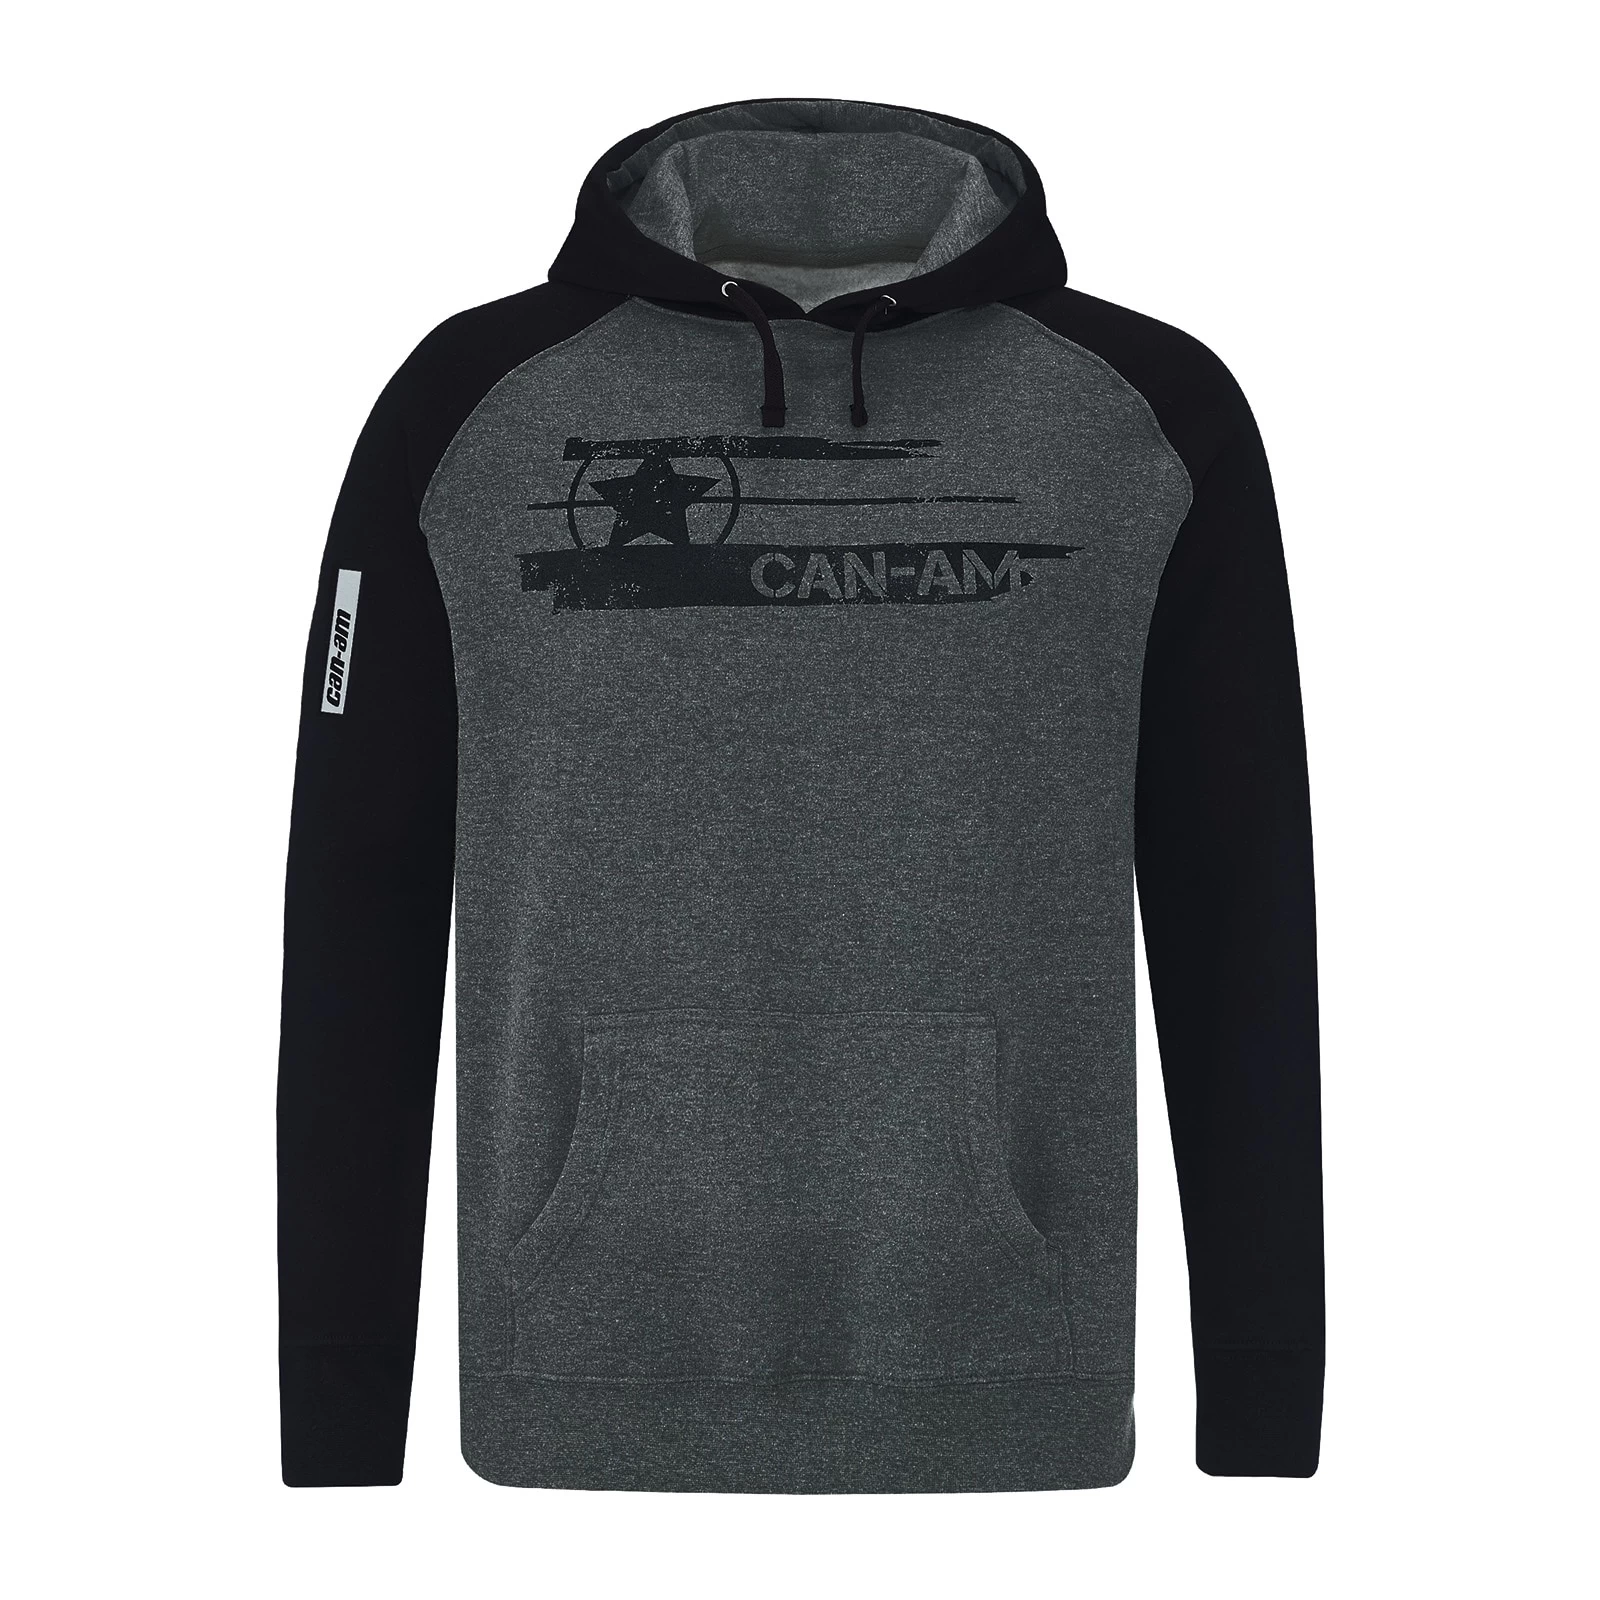 Can-am Bombardier Star Hoodie